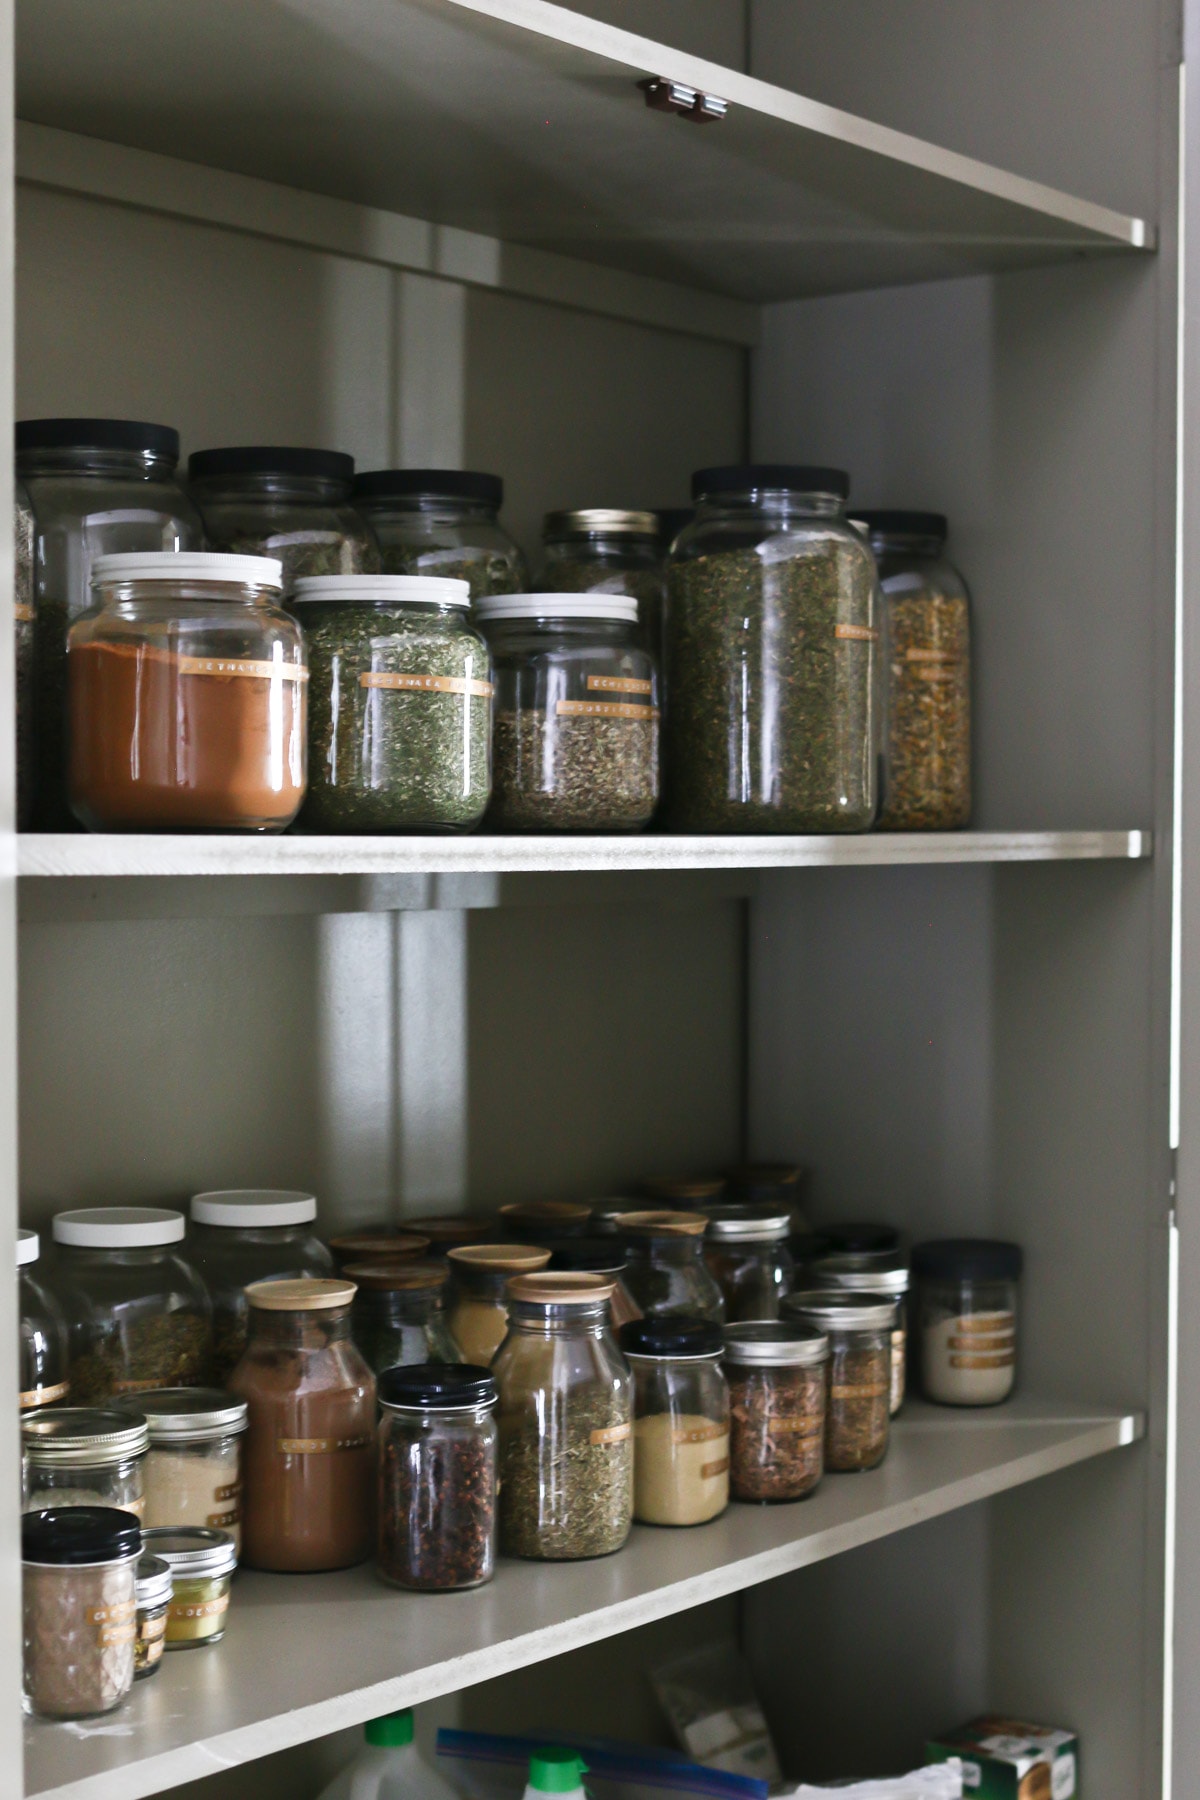 herbs stored in mudroom cabinets